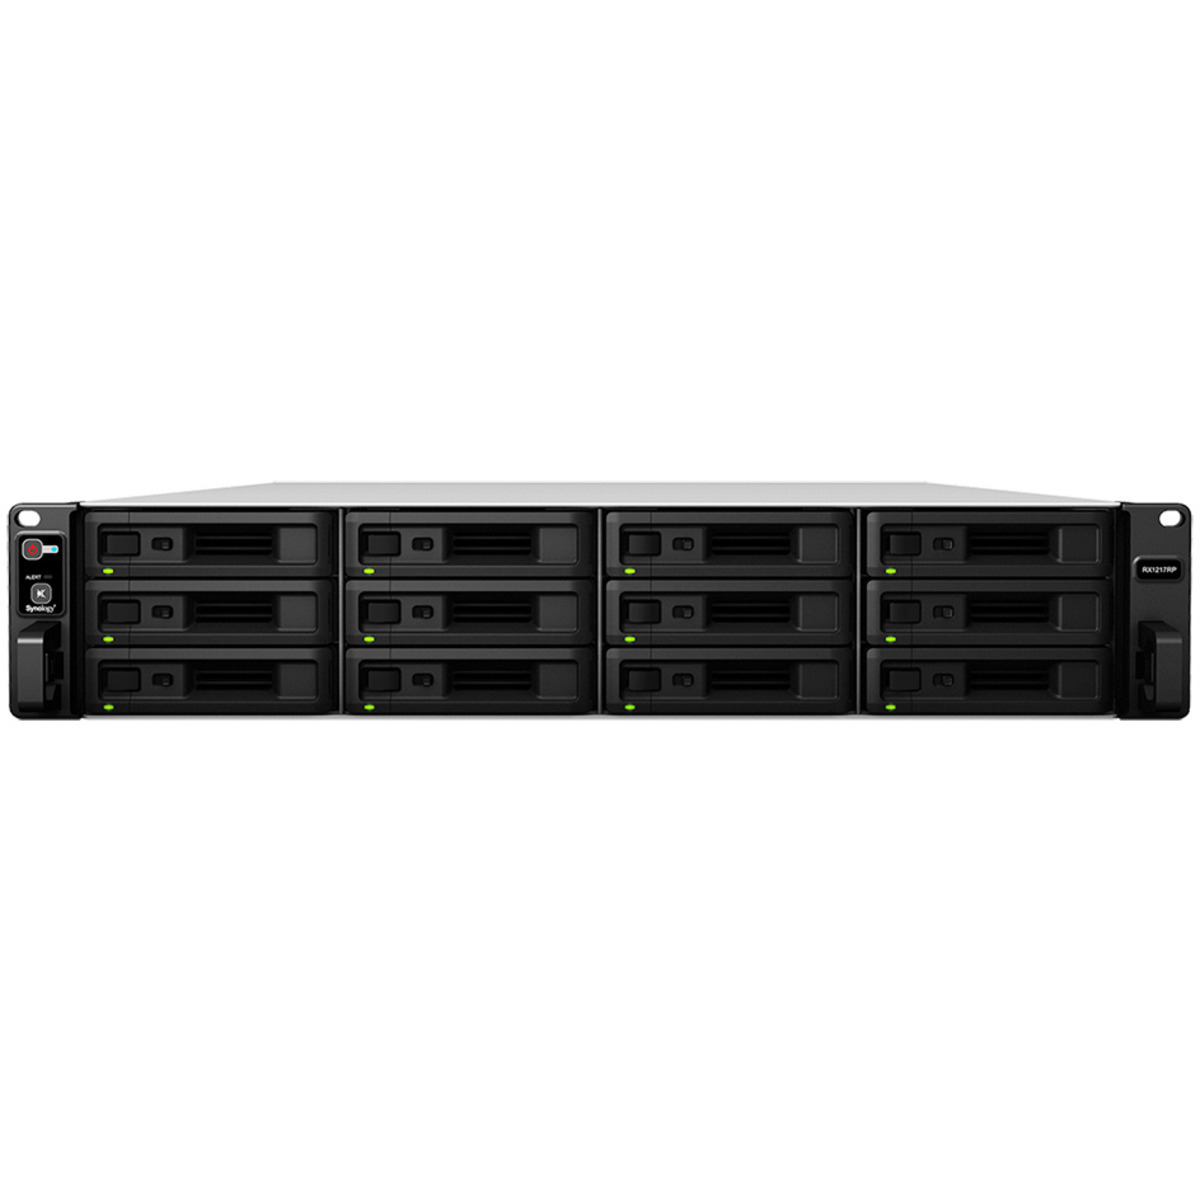 Synology RX1217 External Expansion Drive 144tb 12-Bay RackMount Large Business / Enterprise Expansion Enclosure 9x16tb Seagate EXOS X18 ST16000NM000J 3.5 7200rpm SATA 6Gb/s HDD ENTERPRISE Class Drives Installed - Burn-In Tested RX1217 External Expansion Drive